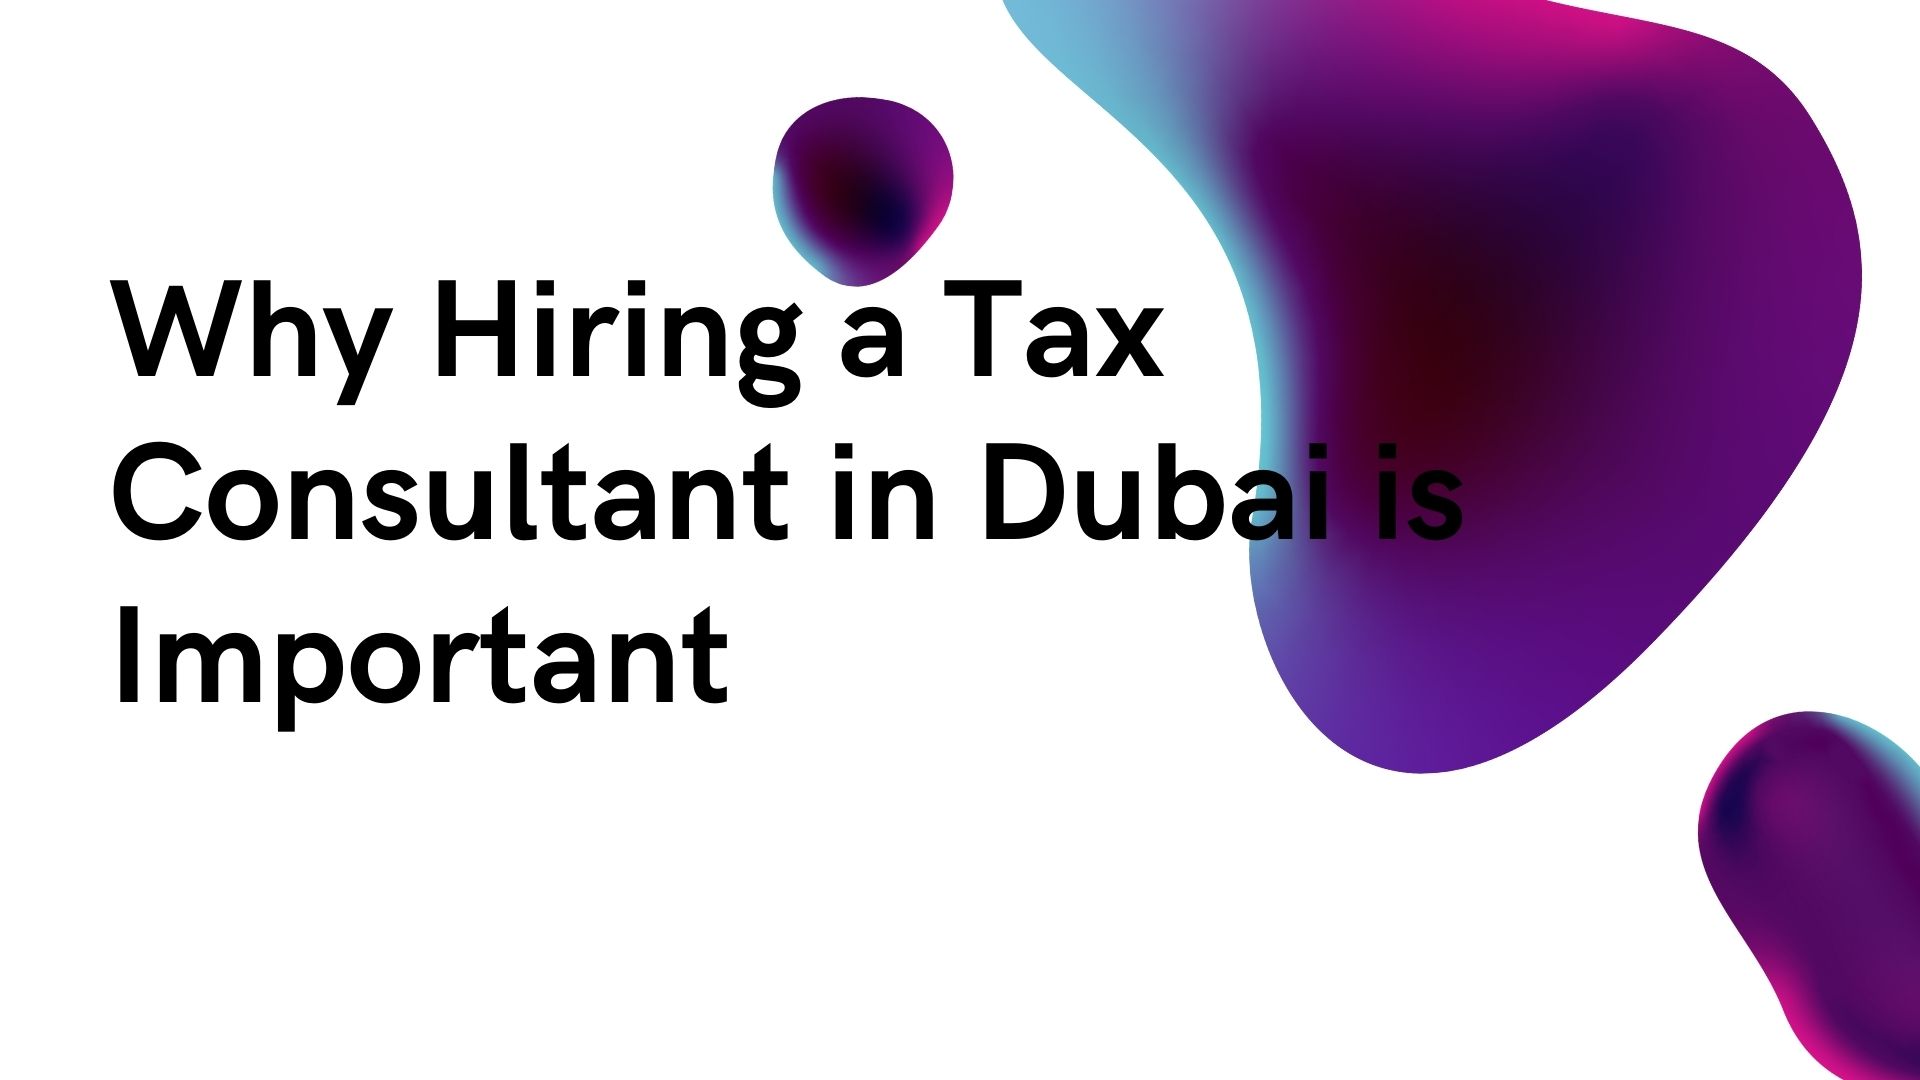 Why-Hiring-a-Tax-Consultant-in-Dubai-is-Important.jpg